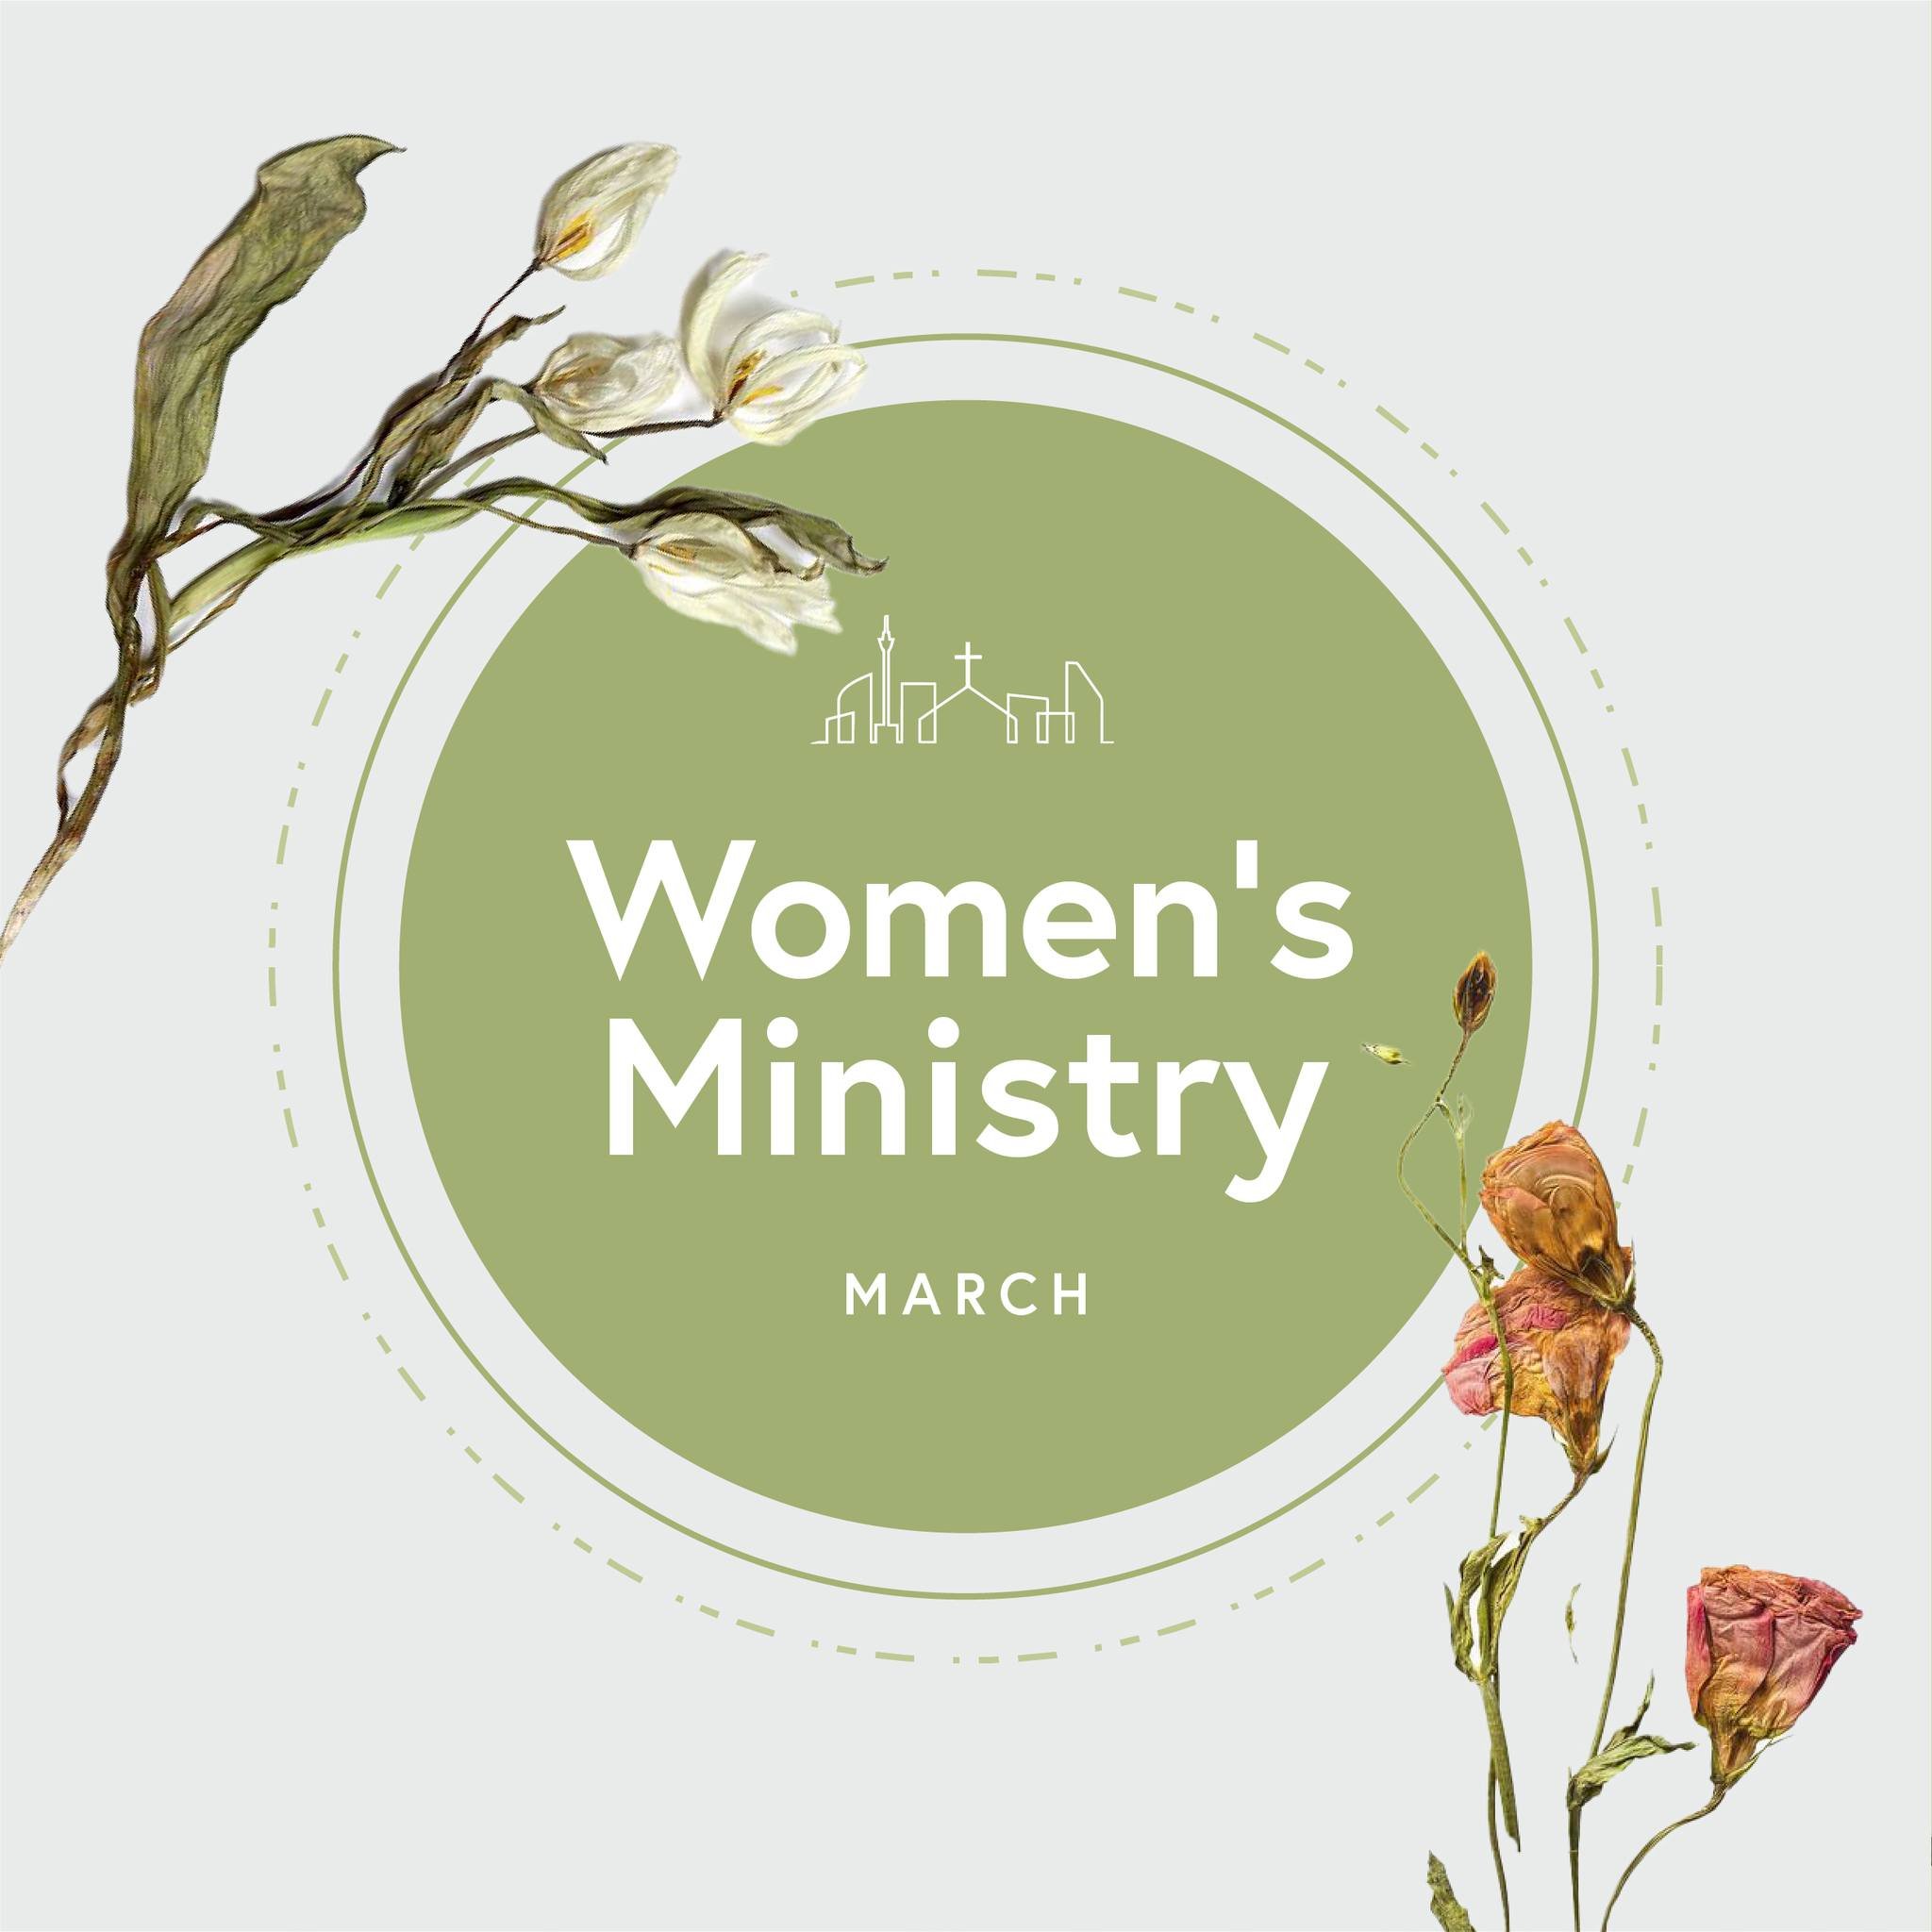 🌷Women&rsquo;s Ministry 🌷

Our first Women&rsquo;s Ministry gathering for this year was held last month with the theme &lsquo;Nourish to Flourish&rsquo;. At SLHCC, we believe women can thrive in building up the church of Christ and raising disciple